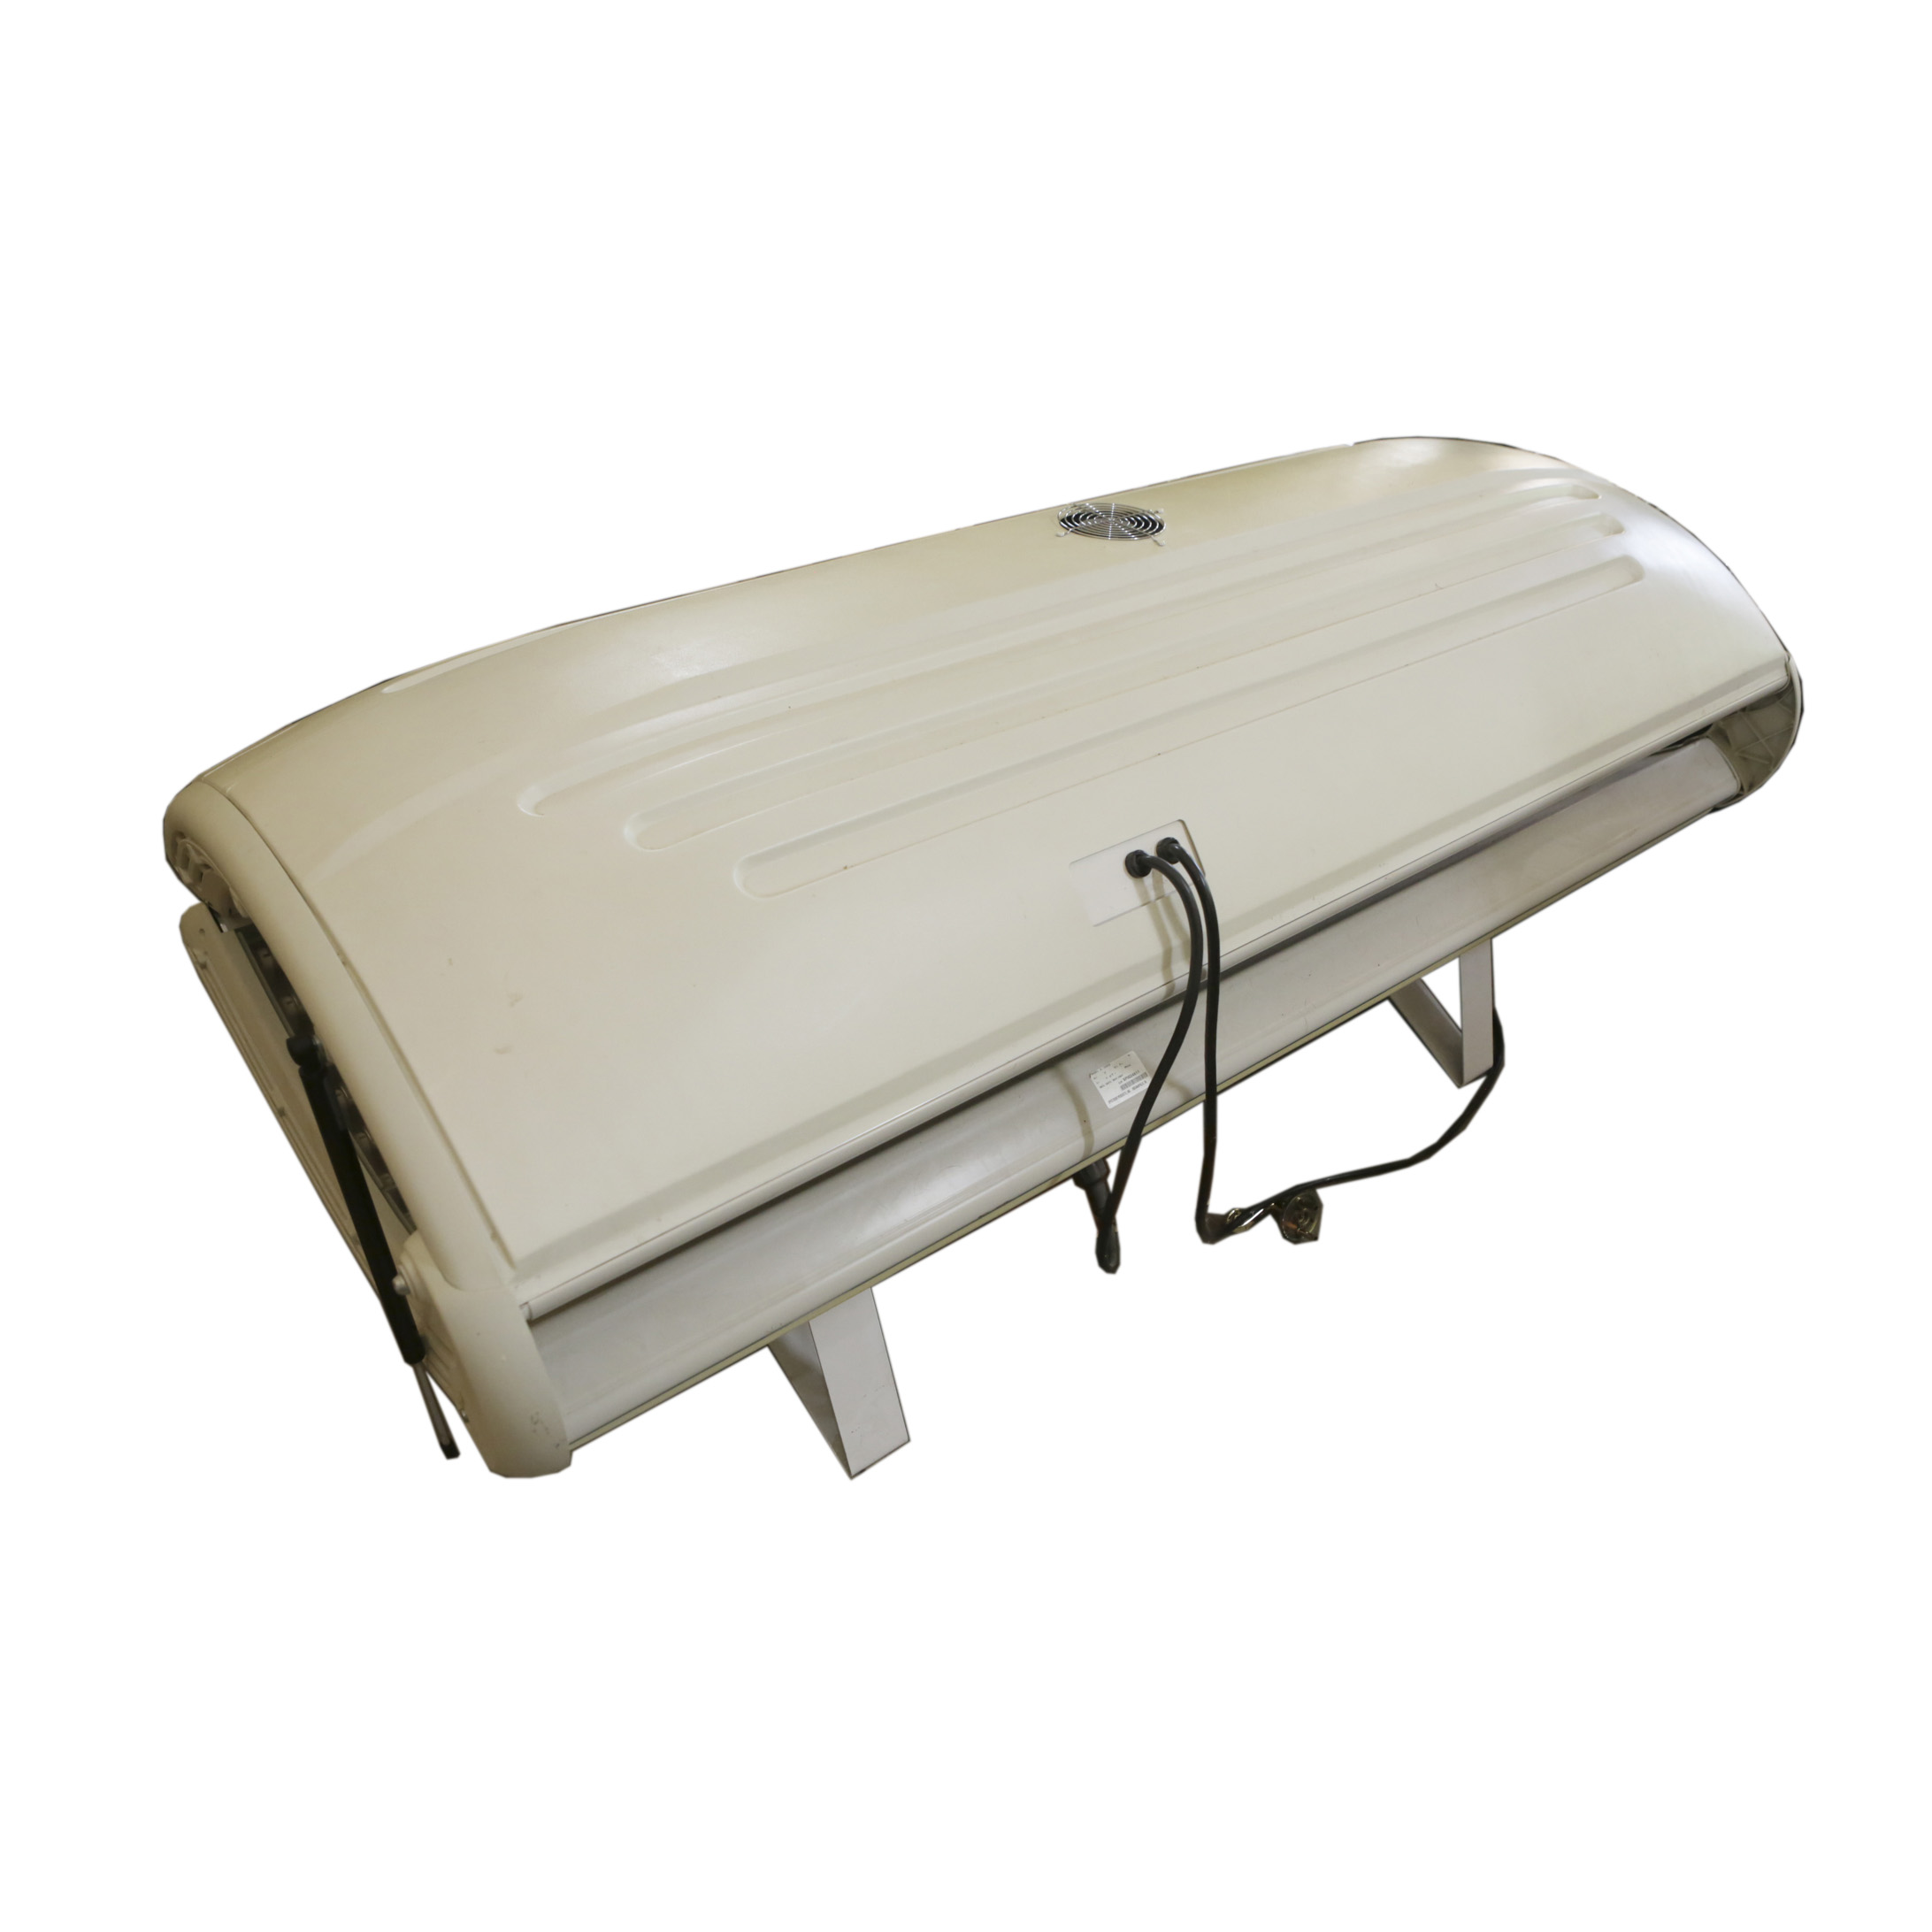 228 sunquest tanning bed